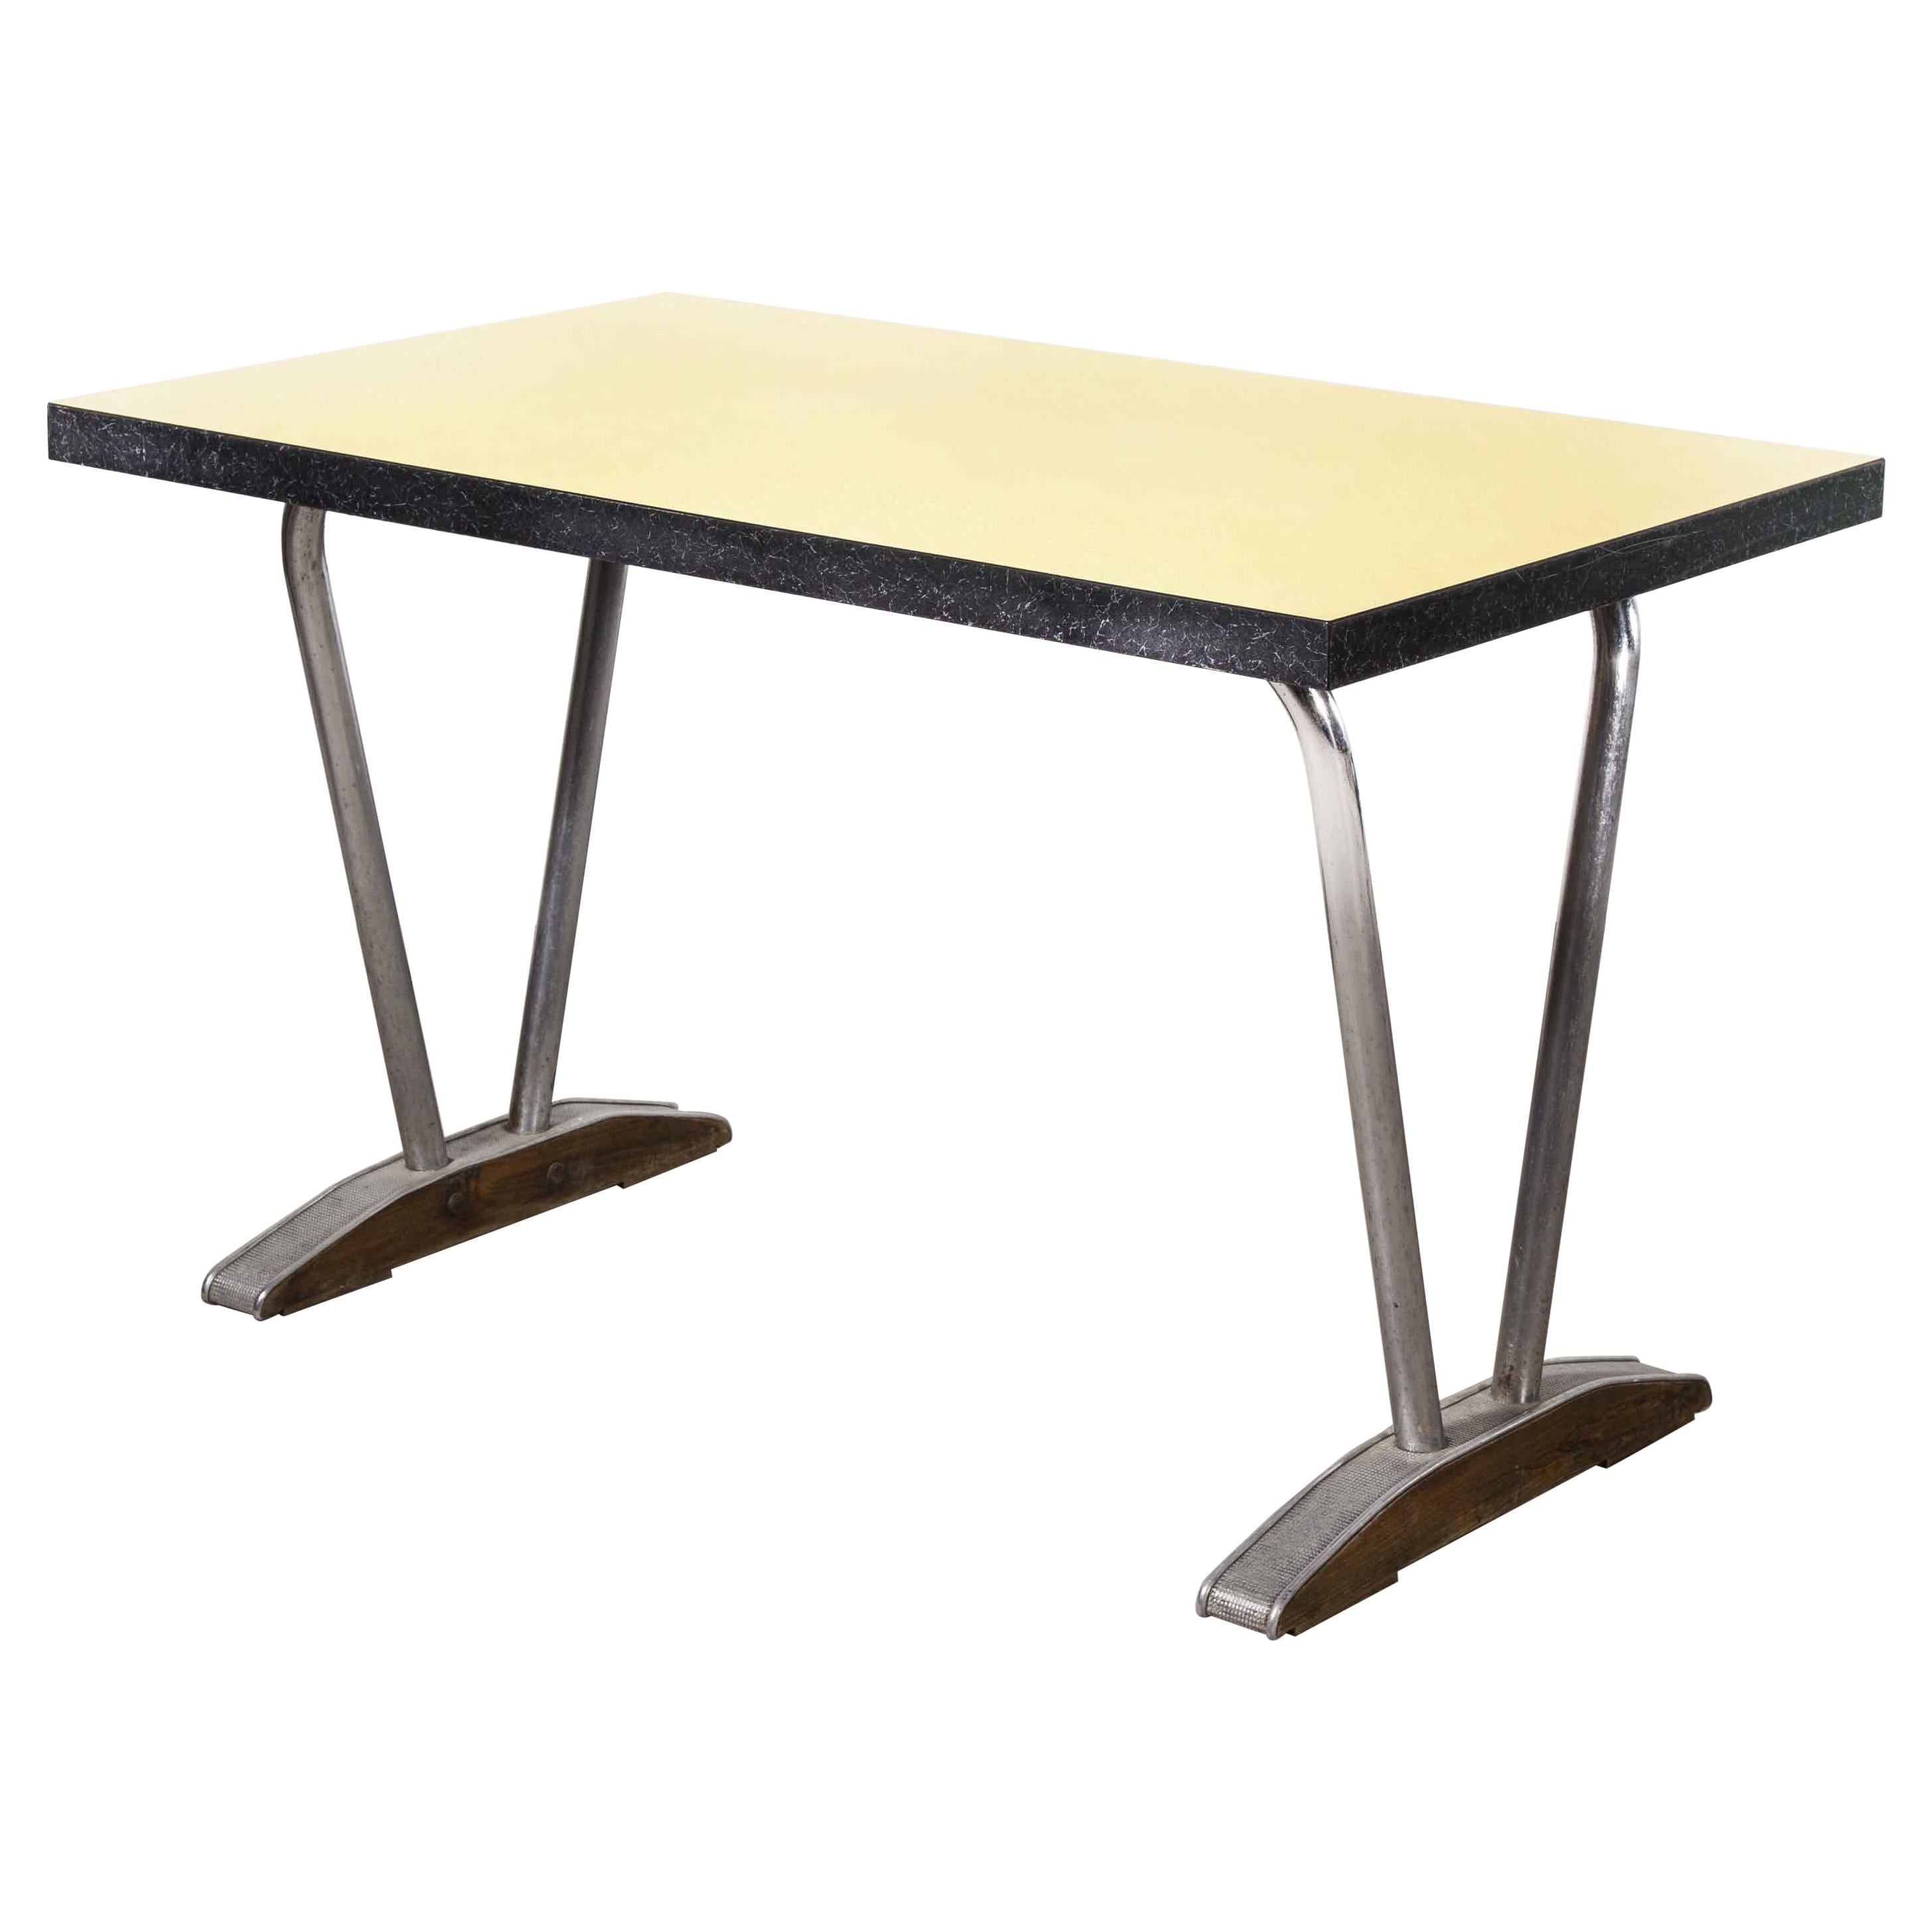 1960’s French Yellow Laminate Dining Table with Aluminium Base, 'Model 779.1' For Sale